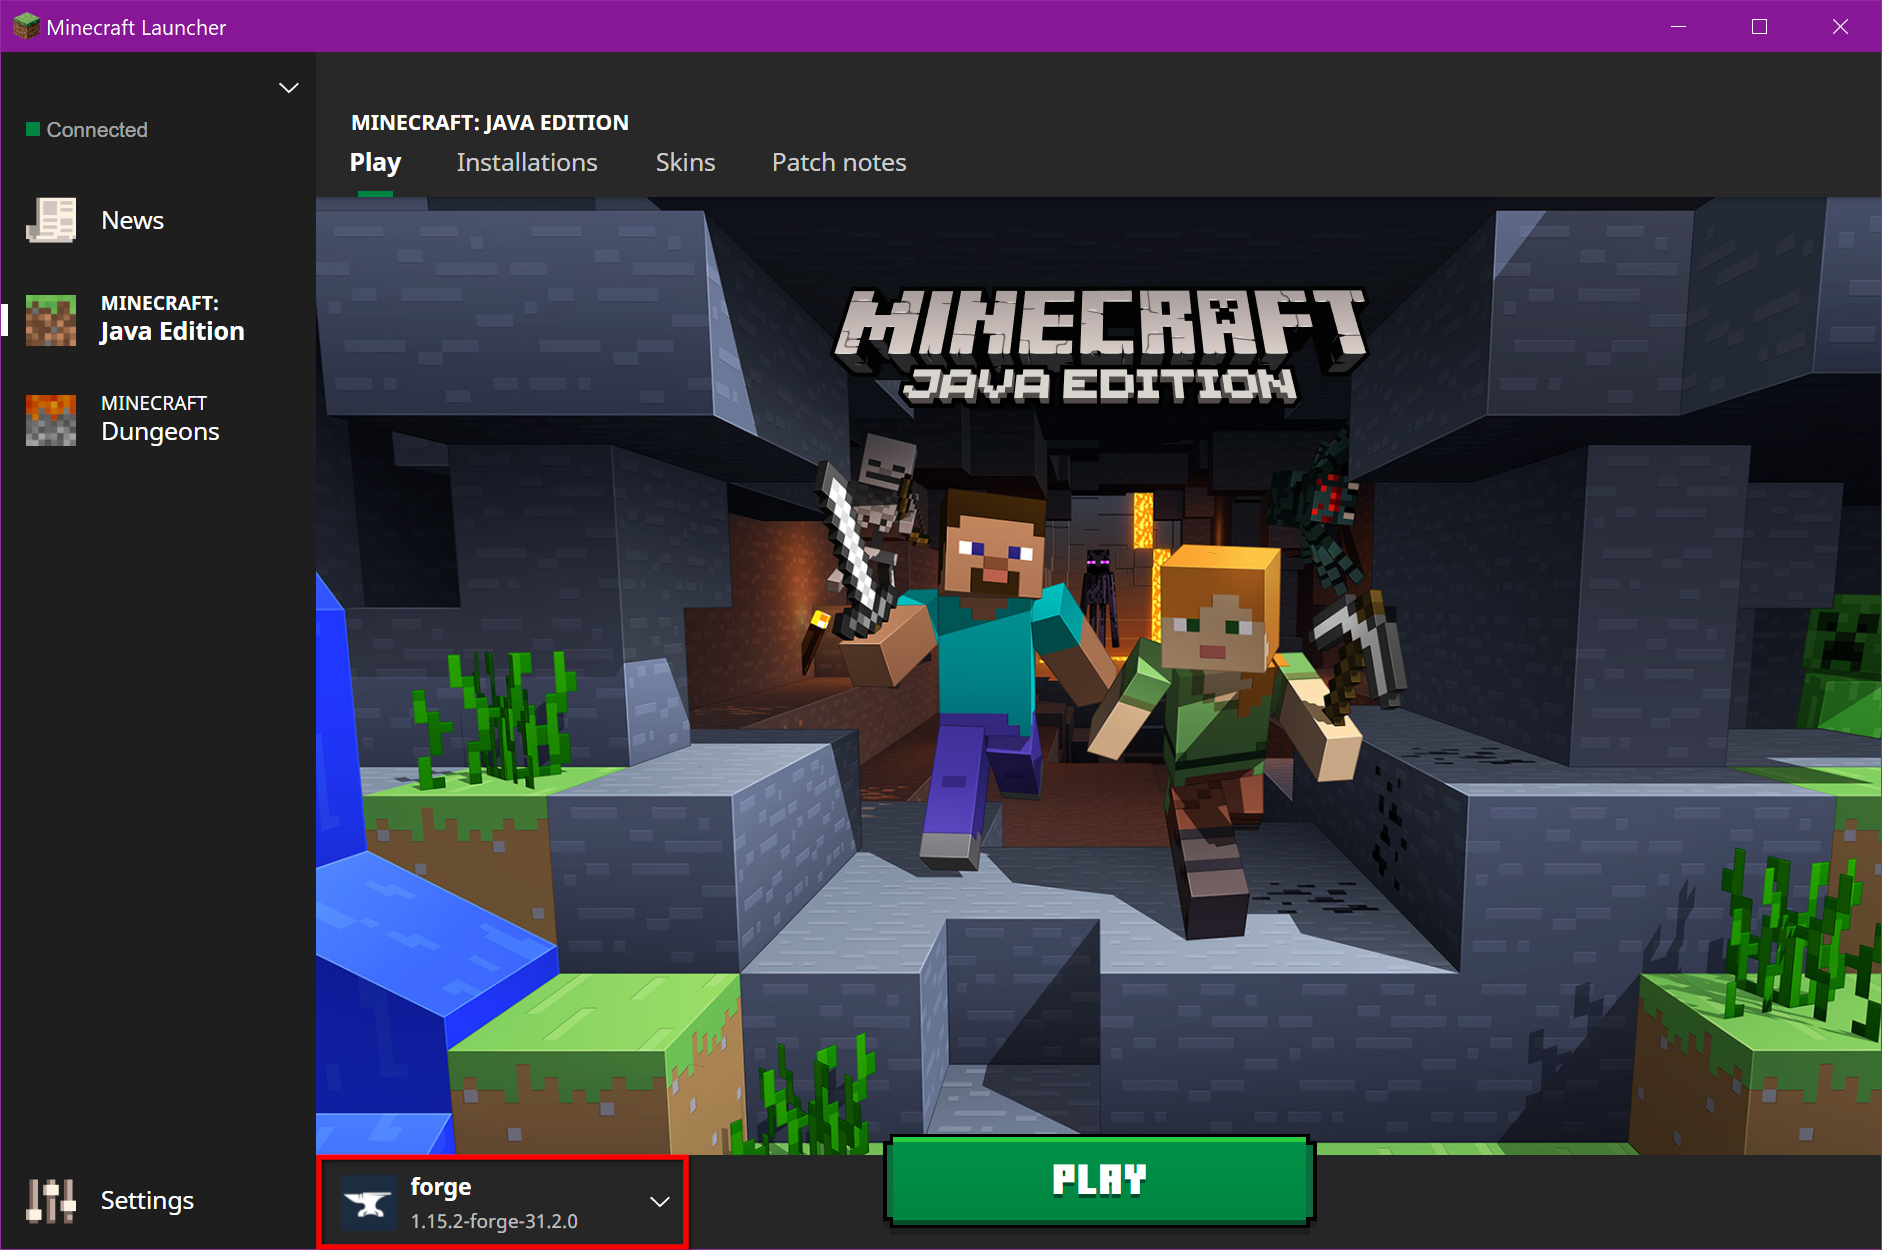 The Minecraft Forge Install screen.